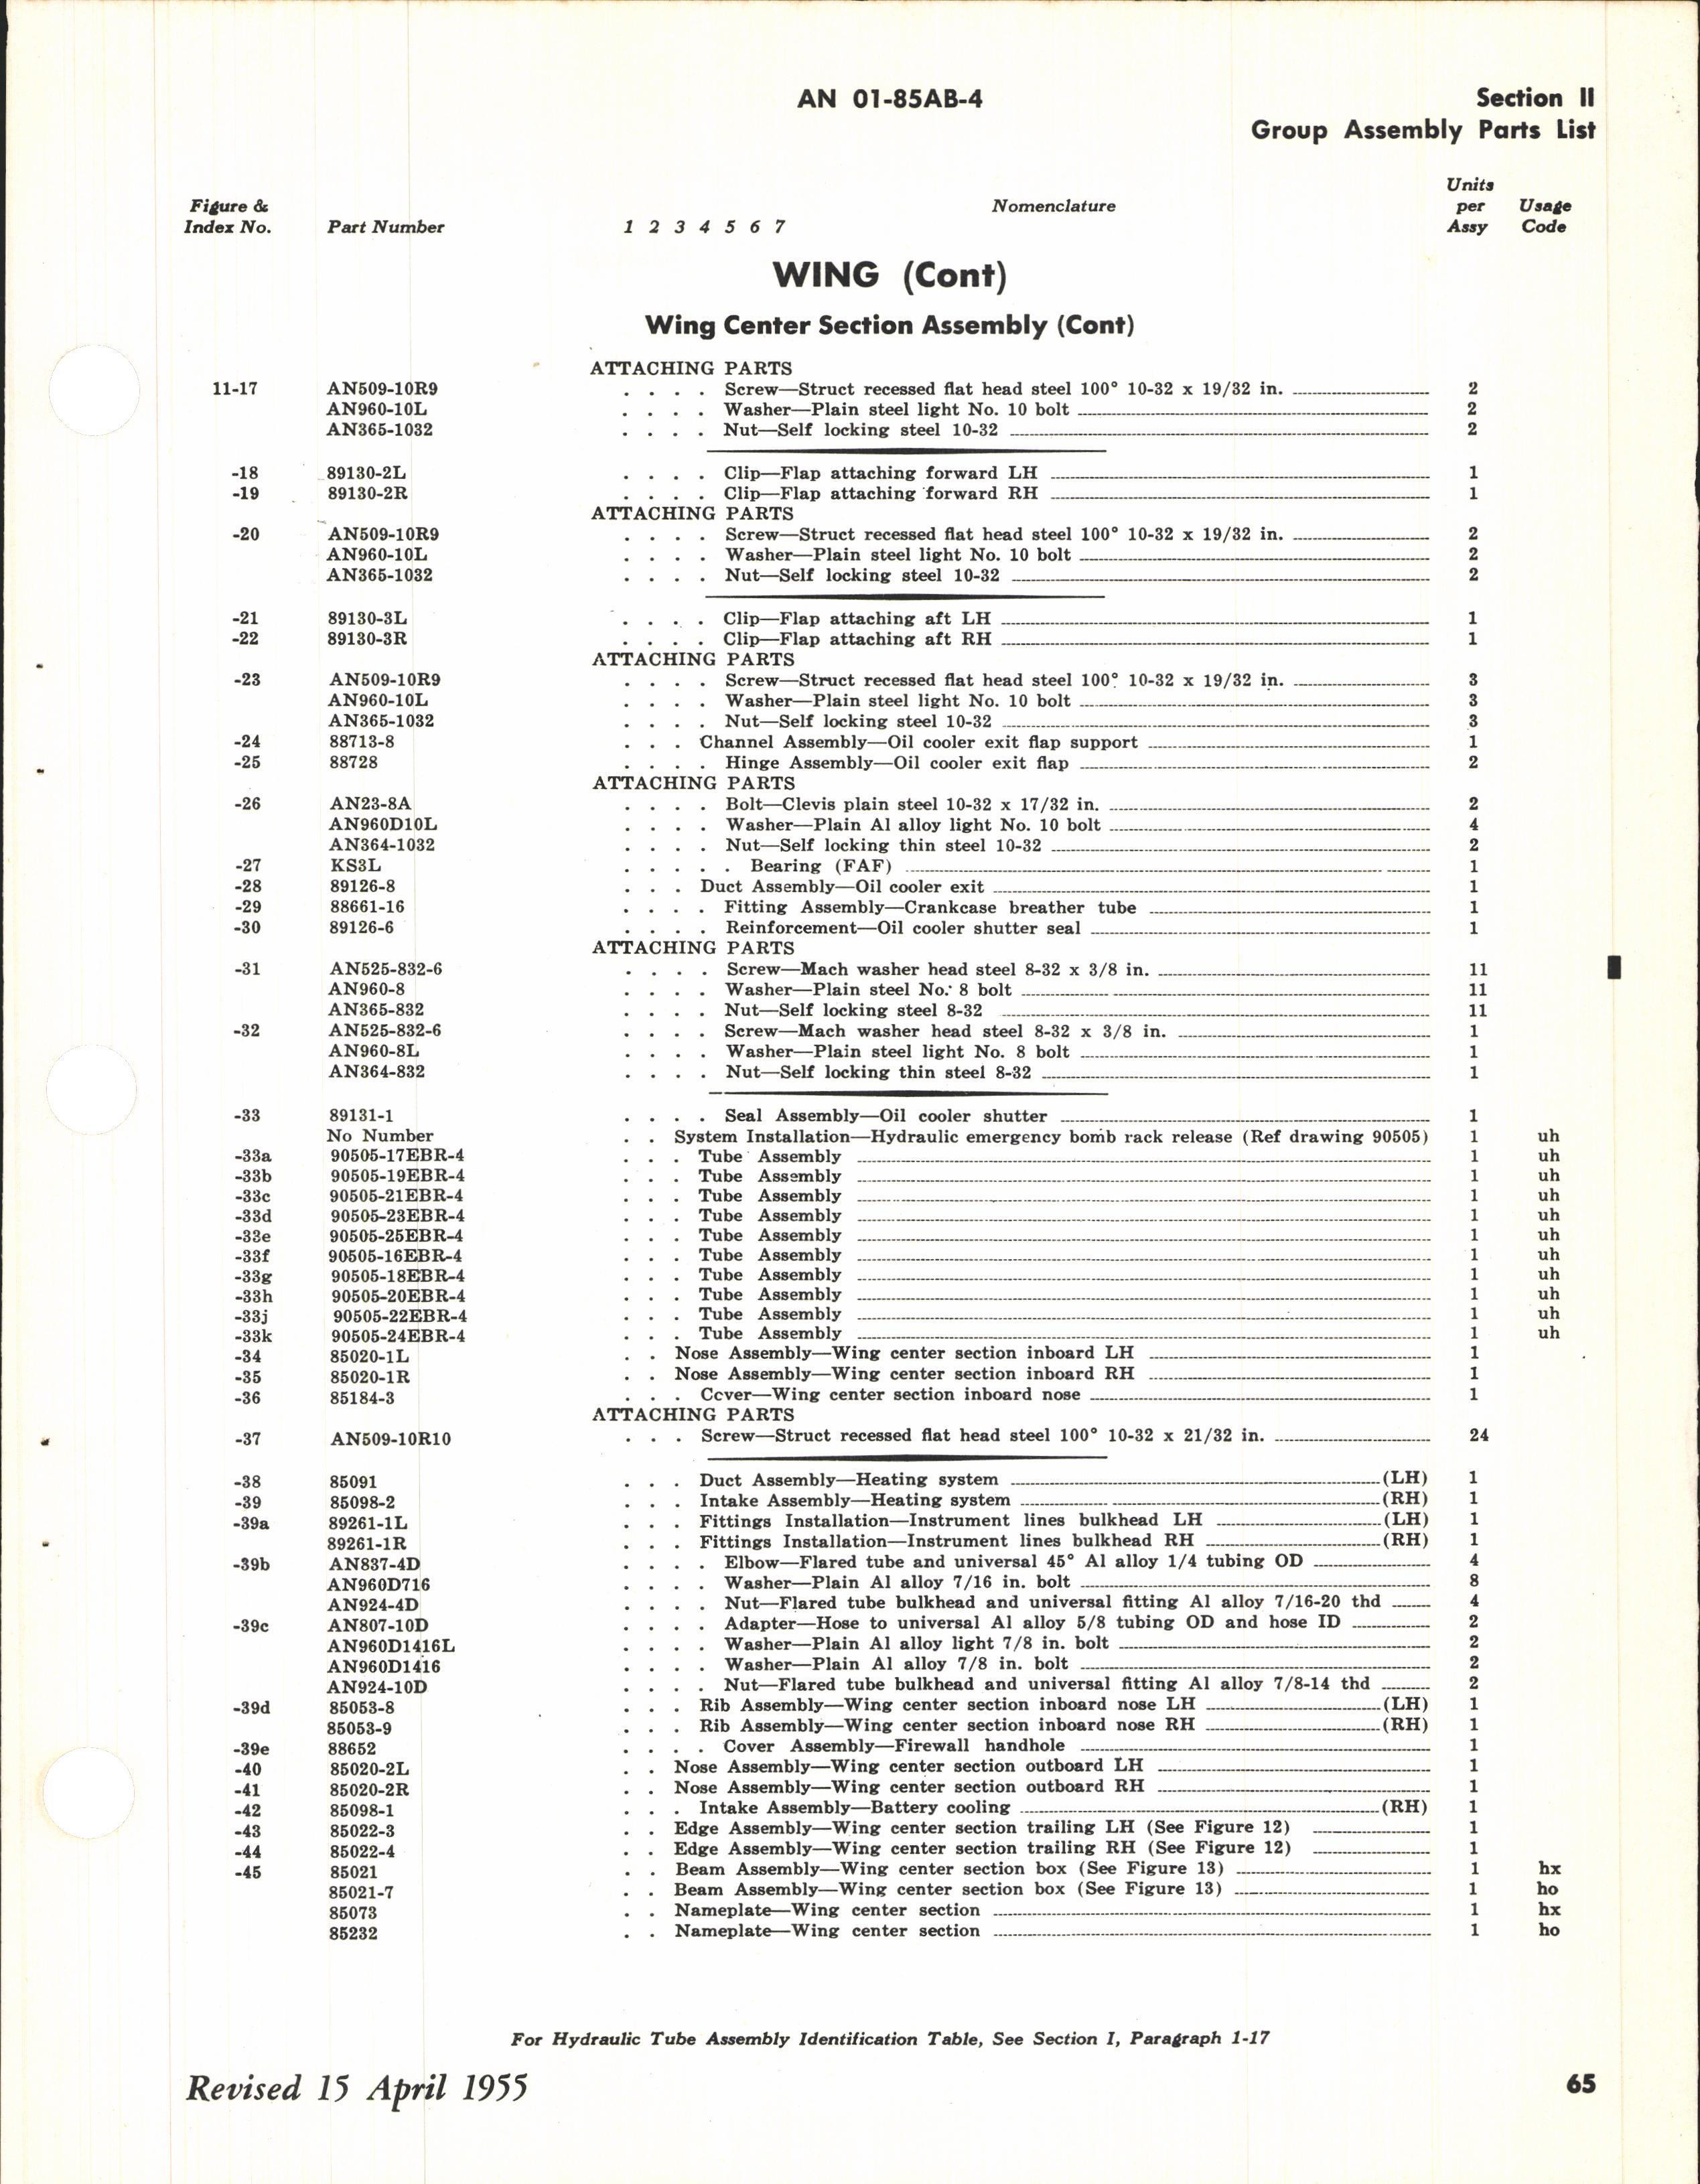 Sample page 35 from AirCorps Library document: Parts Catalog for UF-1, UF-1T, and SA-16A-GR Aircraft